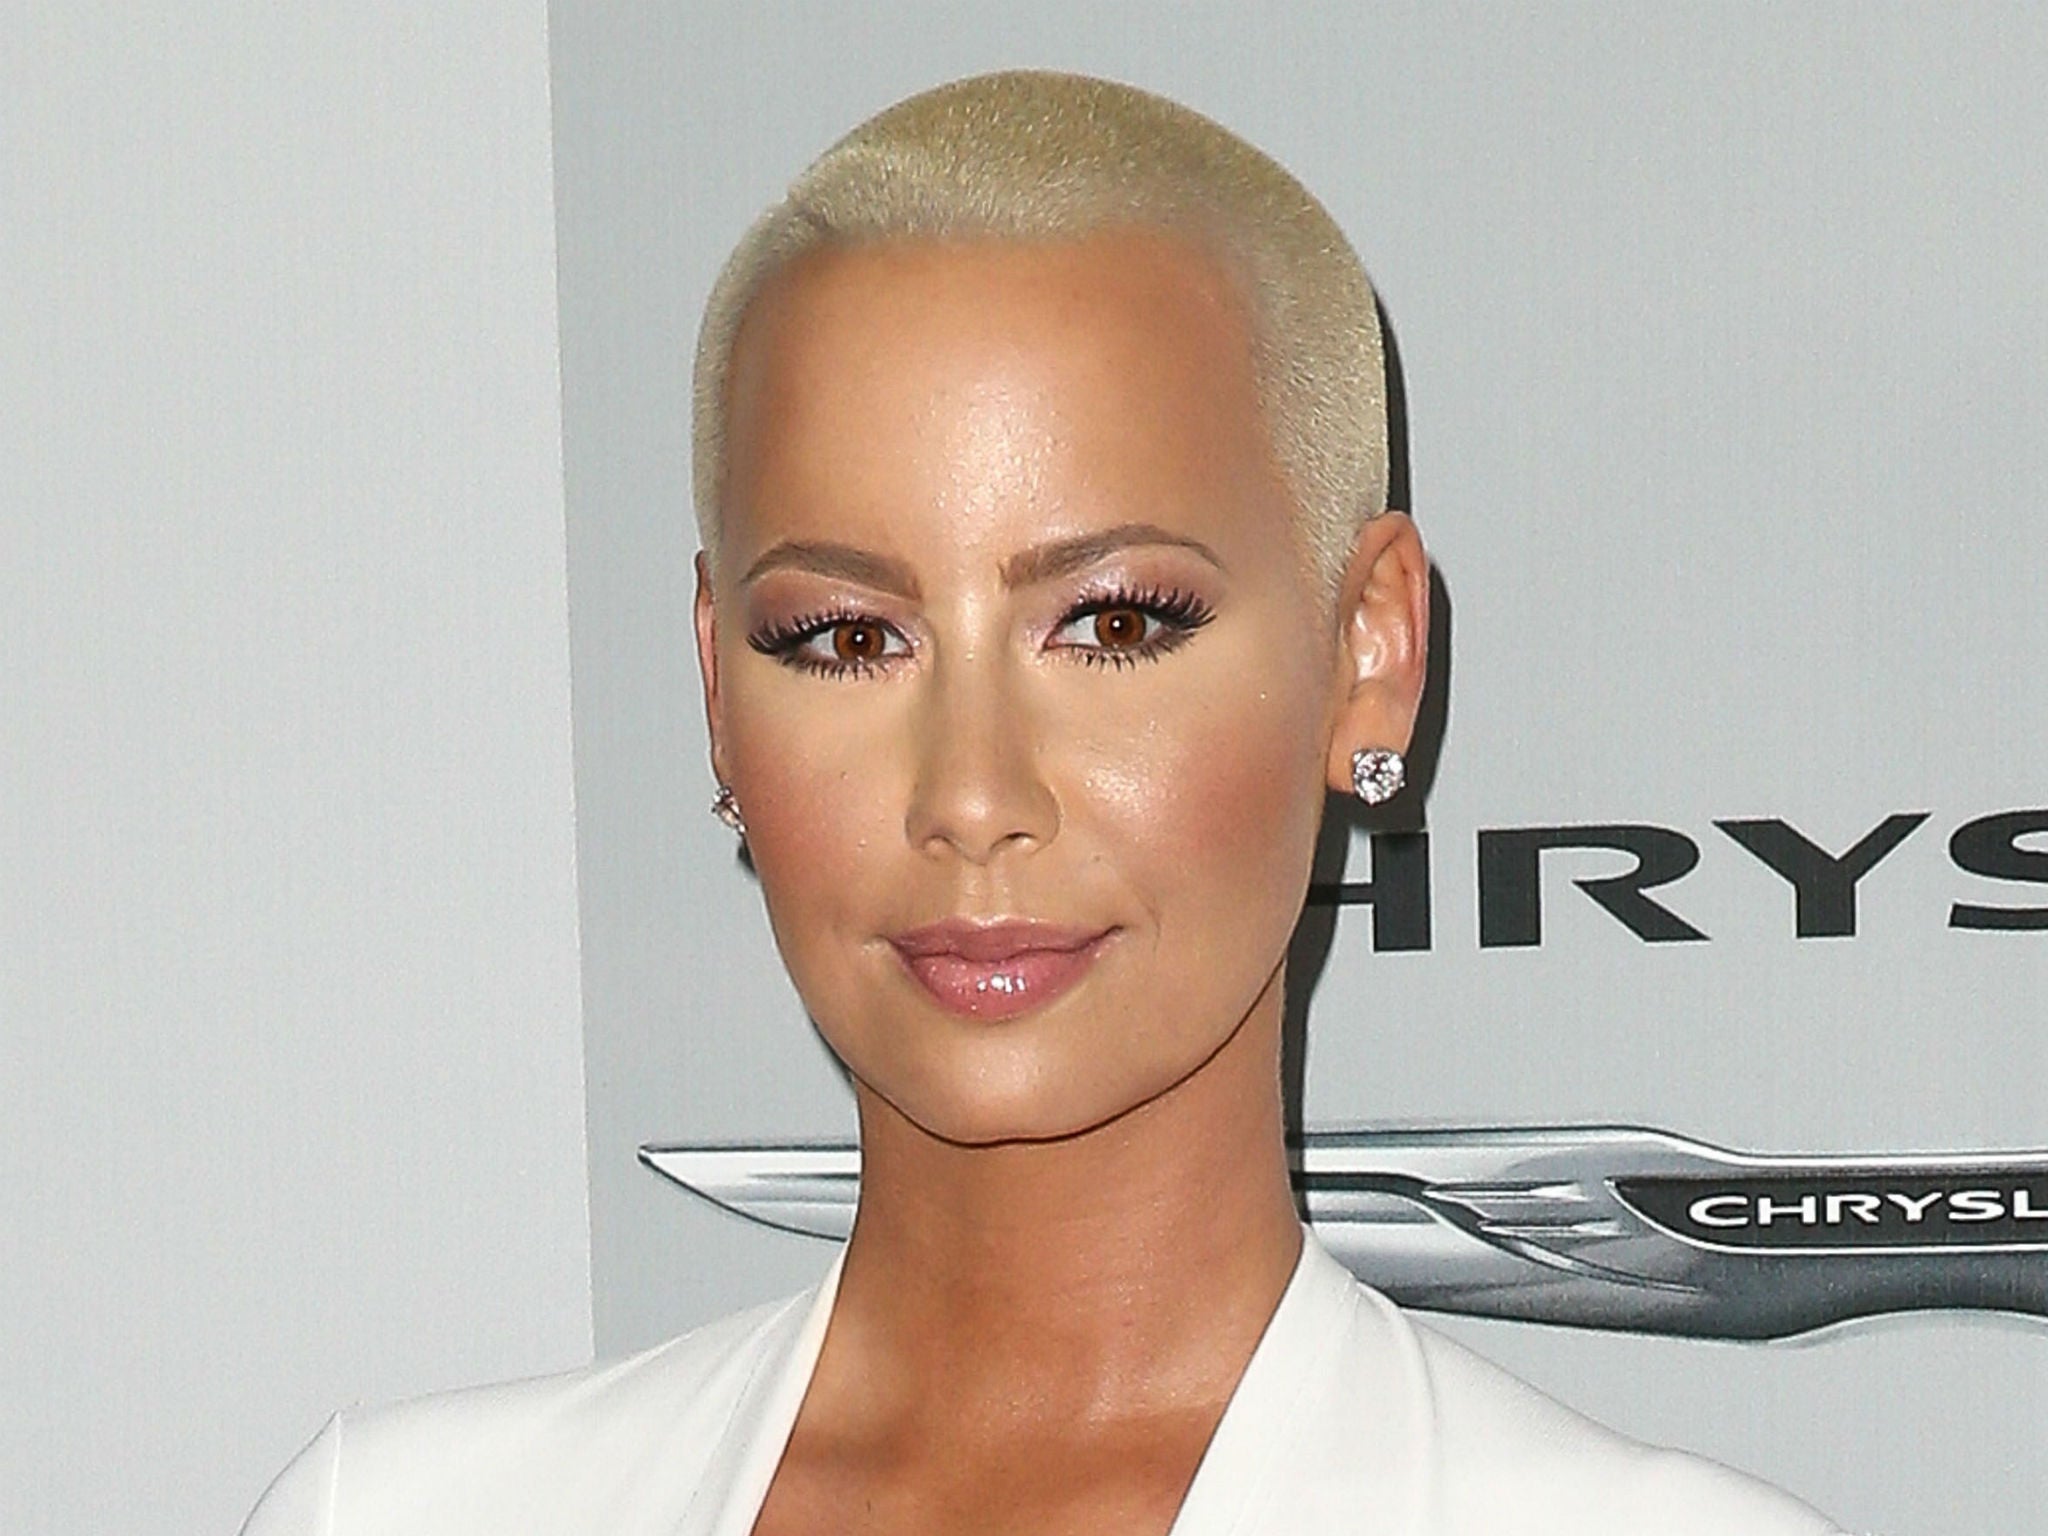 Amber Rose Who Is The Model And Feminist Campaigner The Independent